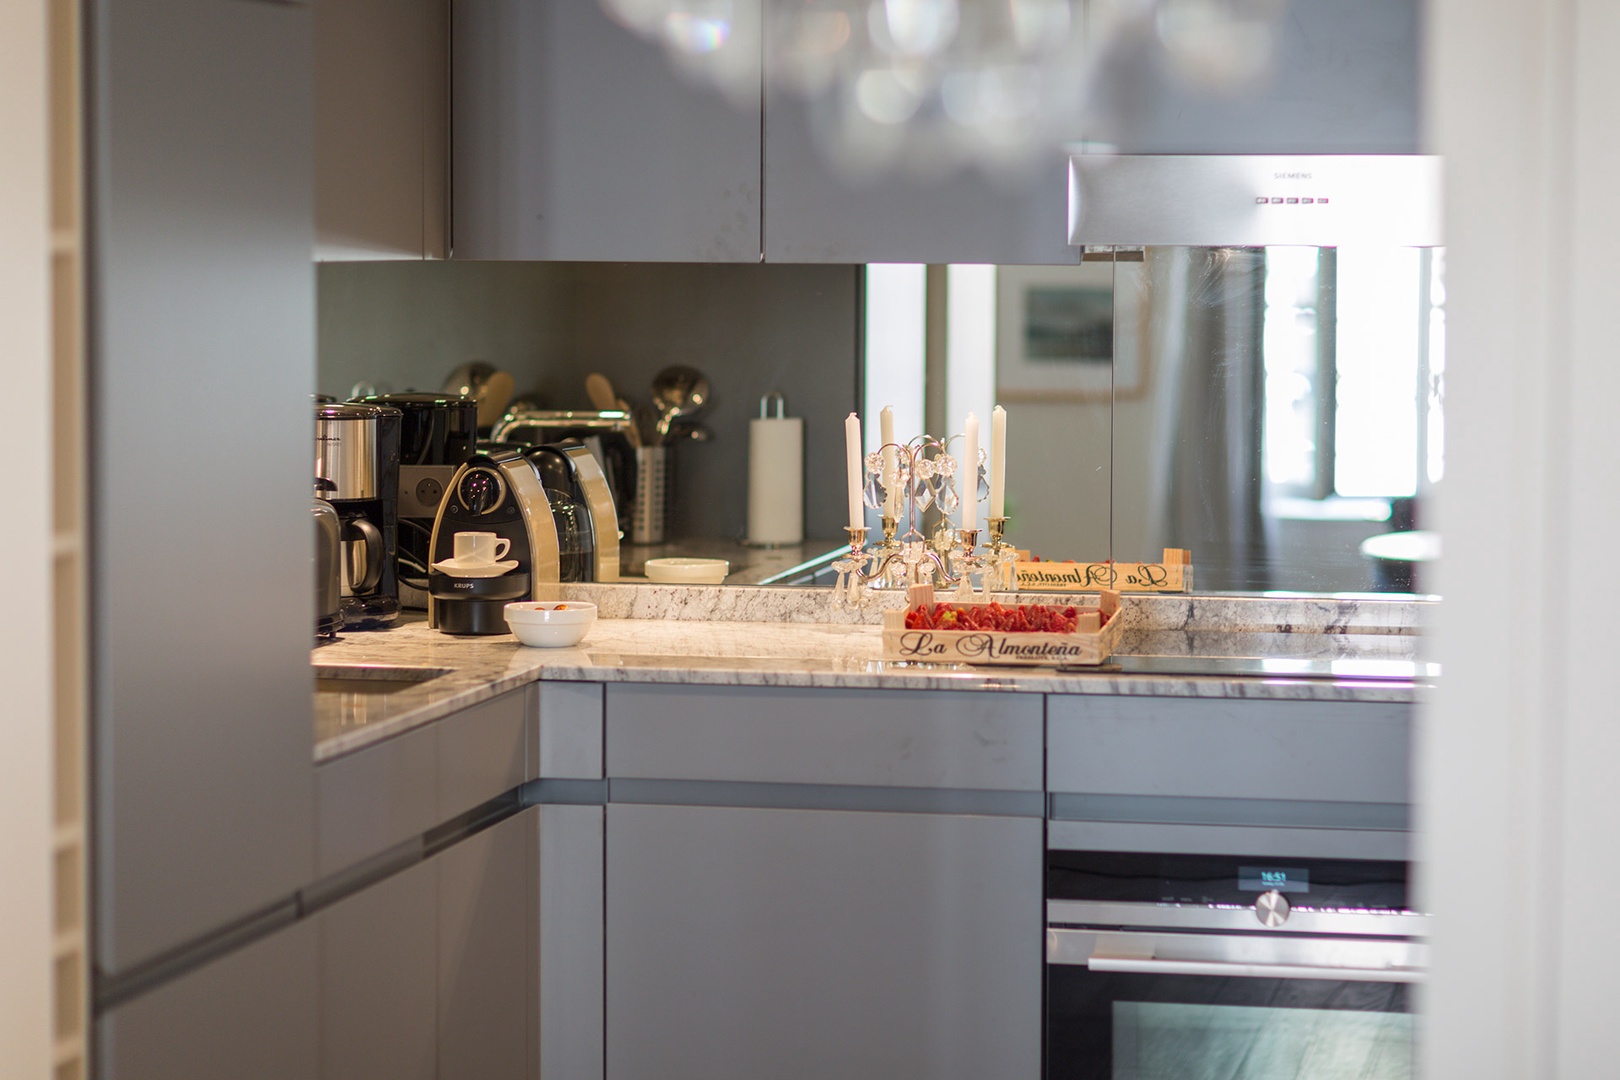 The fully equipped kitchen has everything you need.